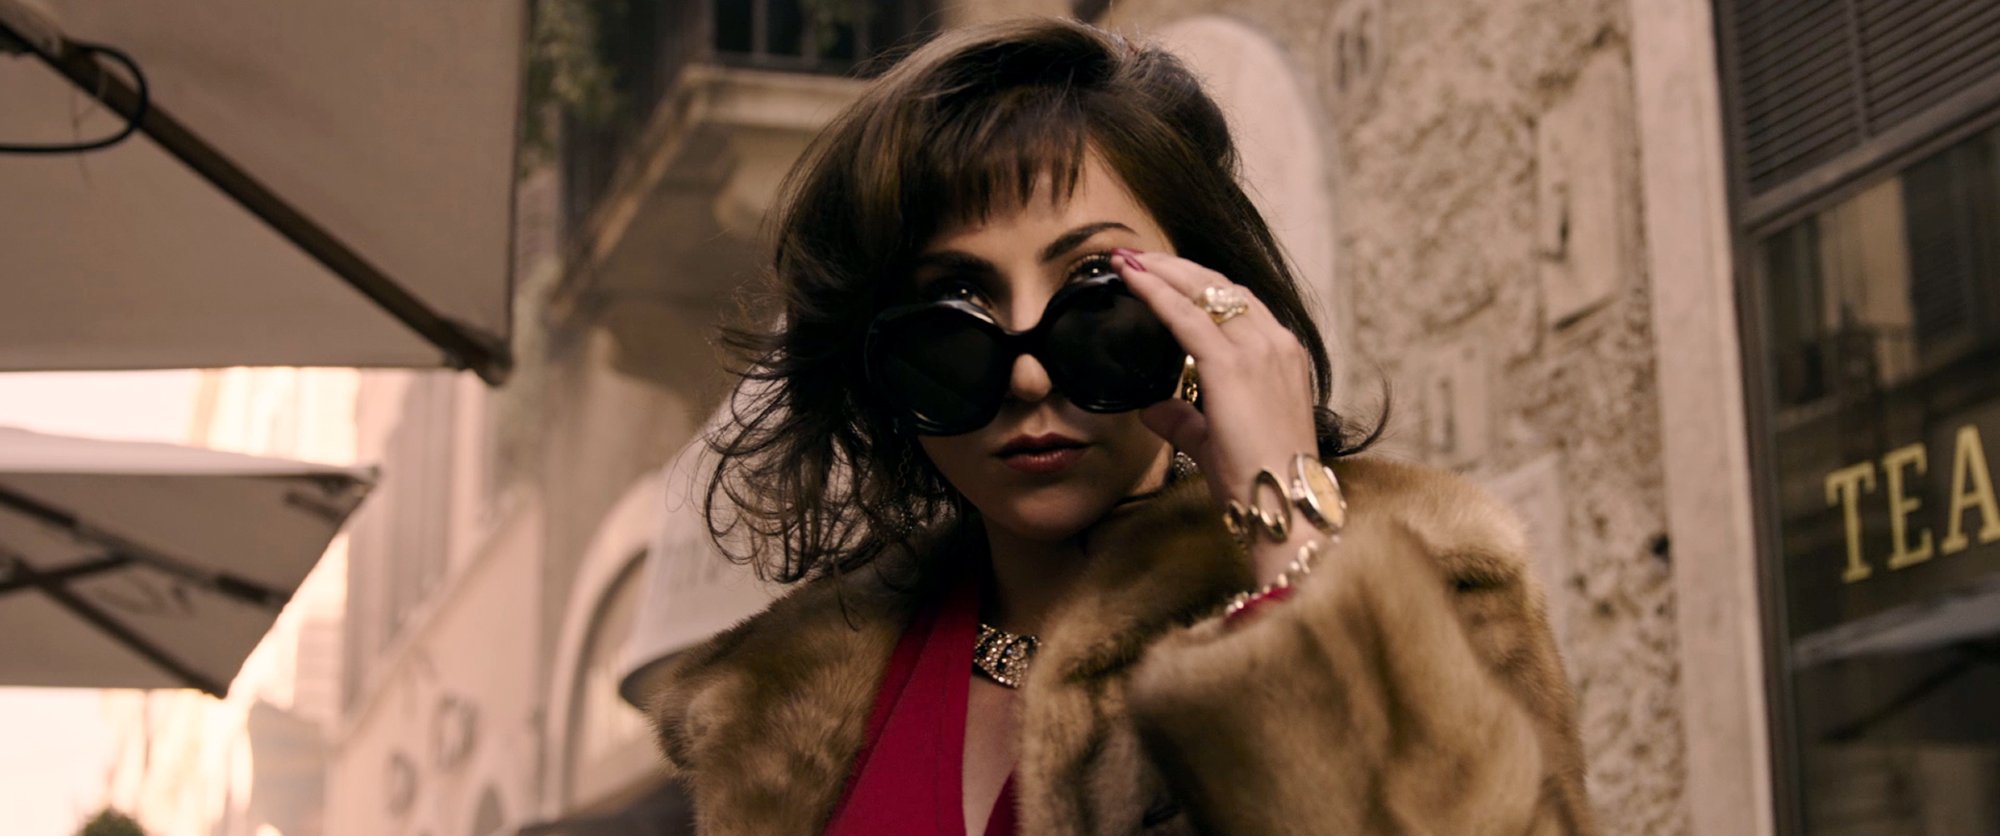 'House of Gucci' review star Lady Gaga as Patrizia Reggiani wearing a fur coat and lowering her sunglasses